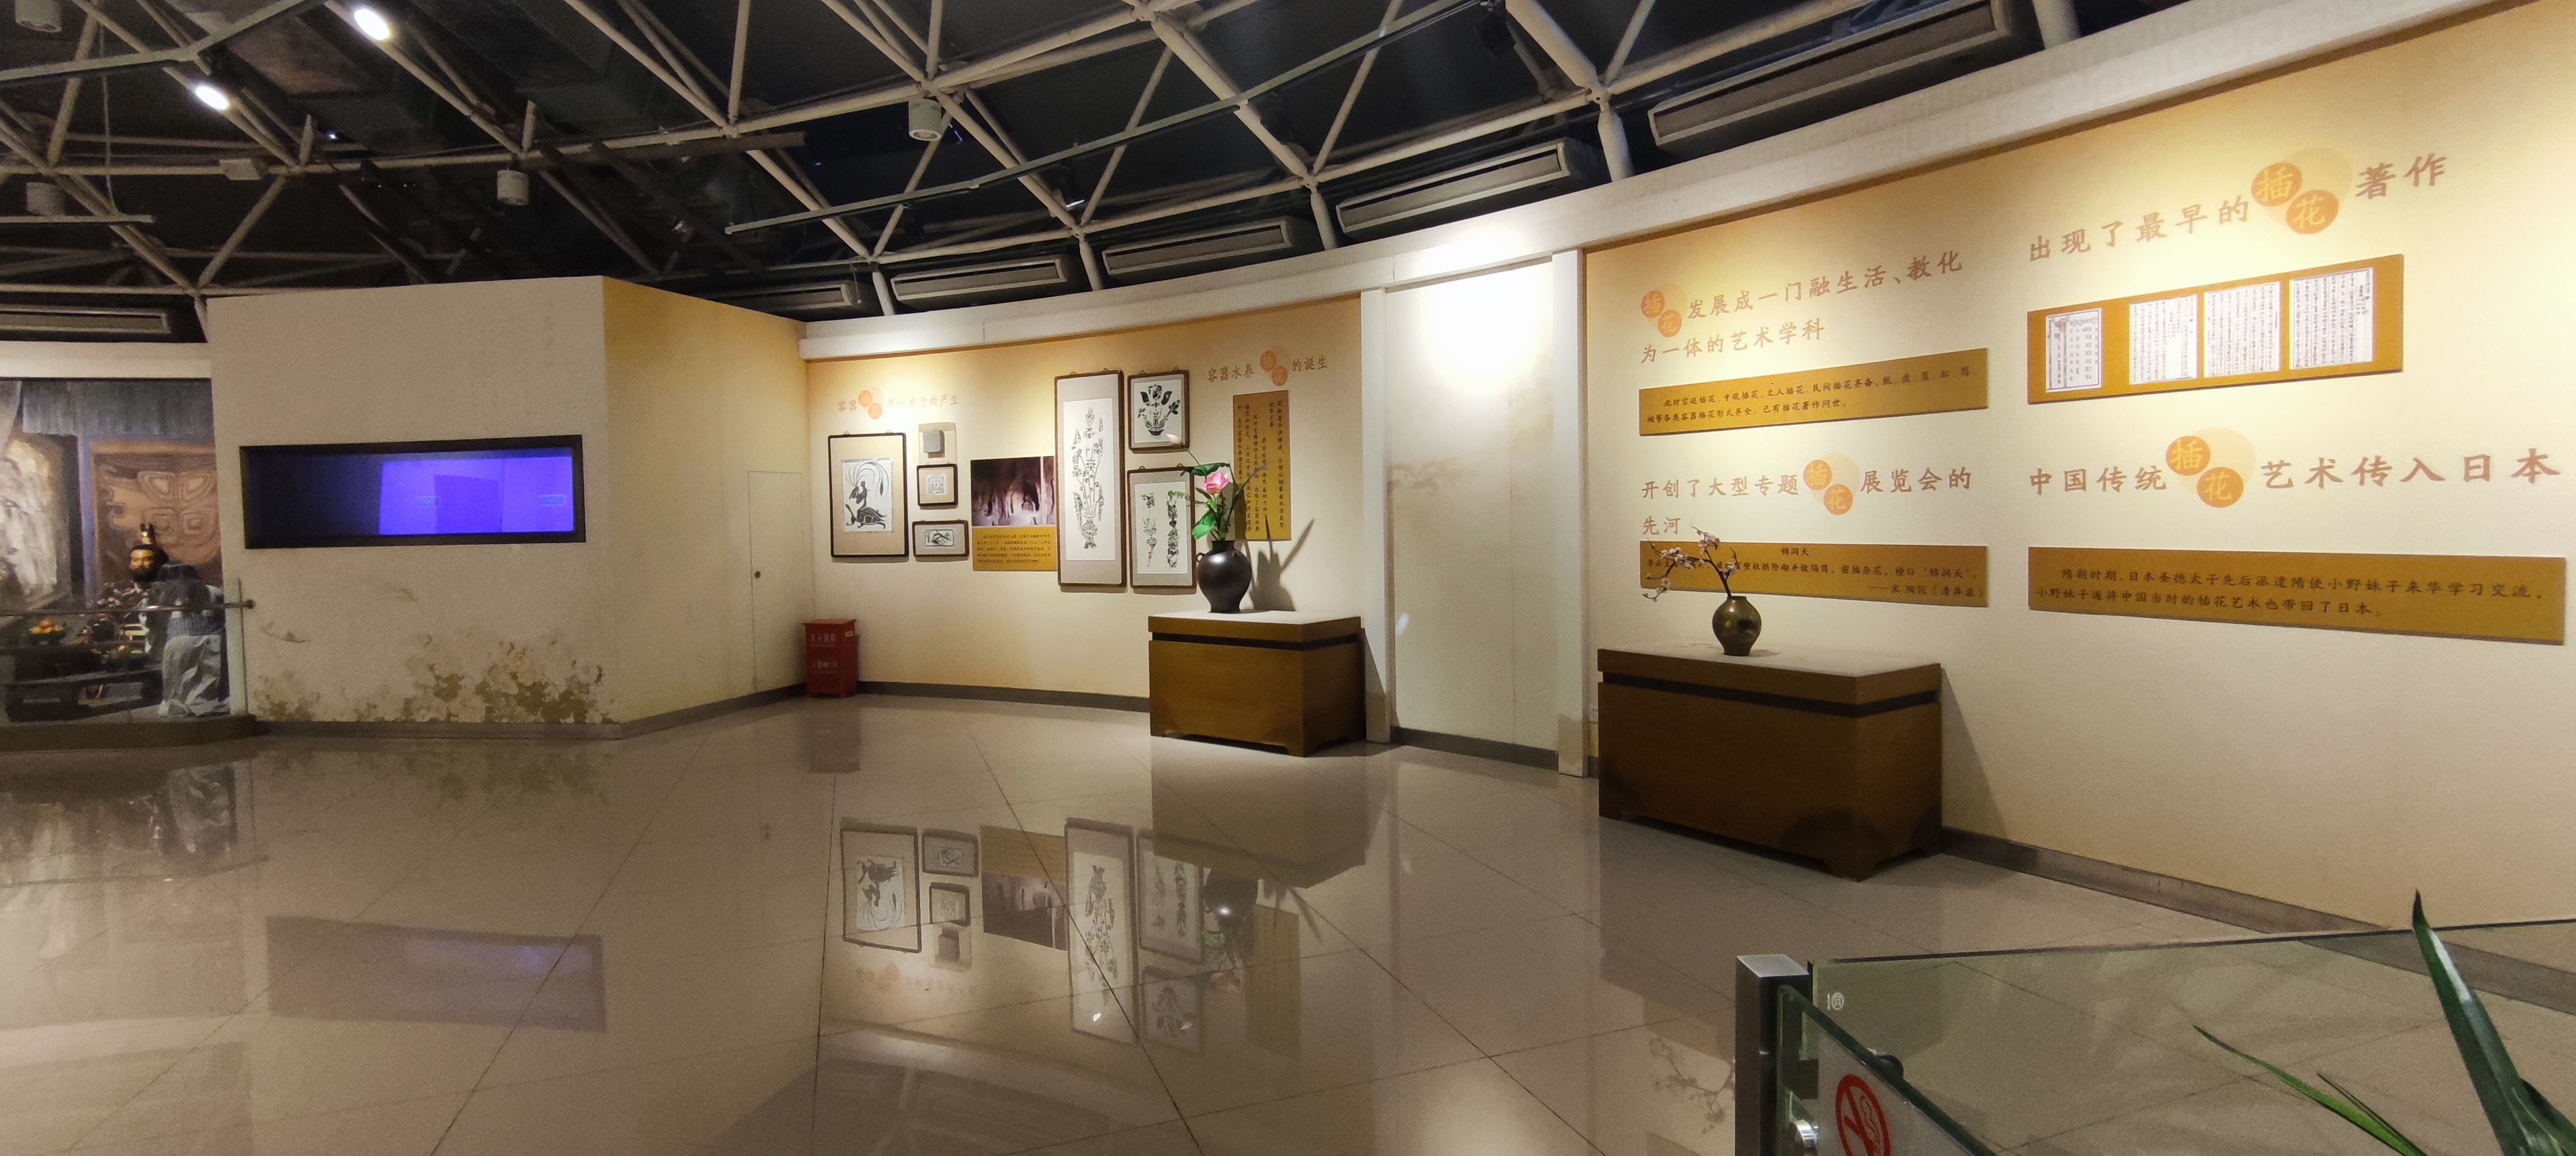 Chahua Art Museum Attraction Reviews Chahua Art Museum Tickets Chahua Art Museum Discounts Chahua Art Museum Transportation Address Opening Hours Attractions Hotels And Food Near Chahua Art Museum Trip Com